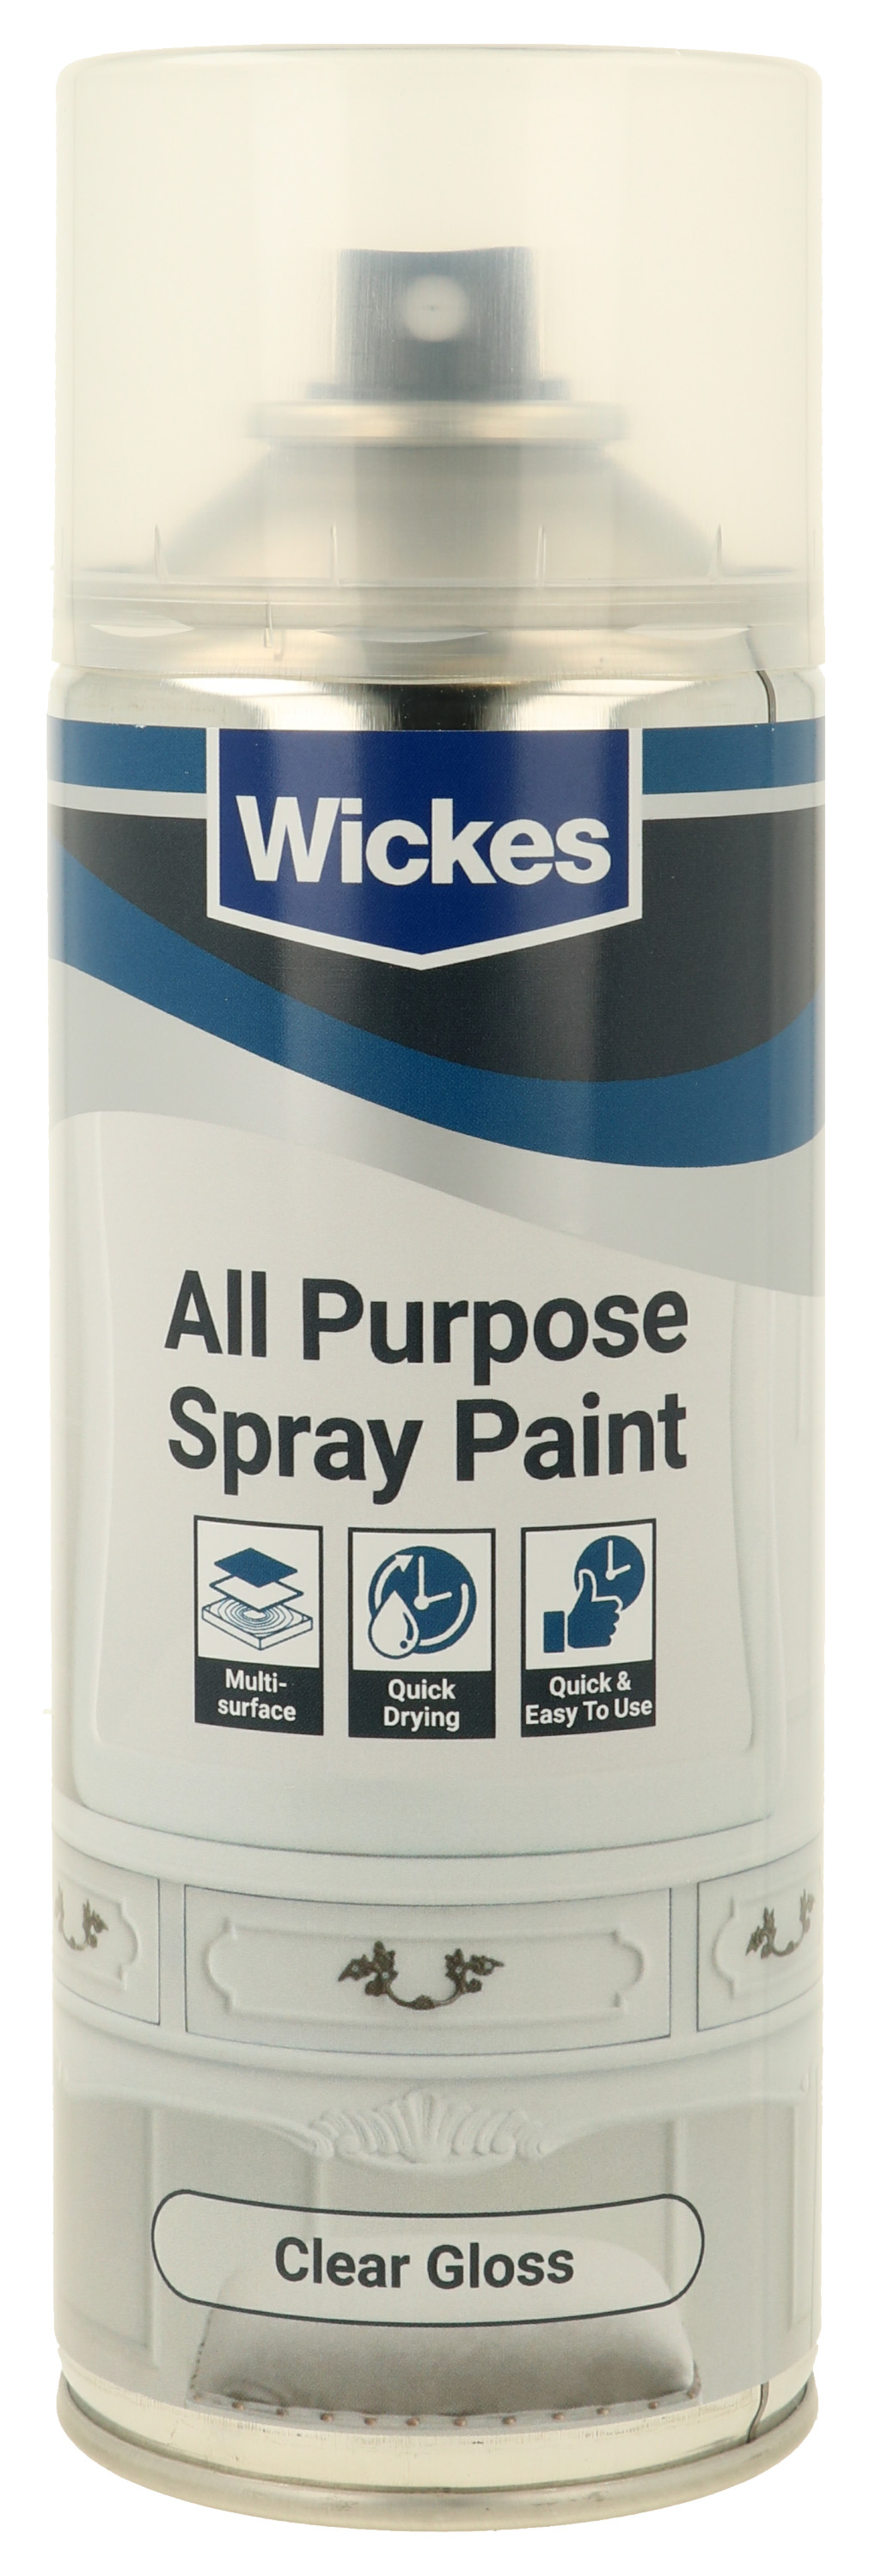 Wickes All Purpose Clear Gloss Spray Paint - 400ml